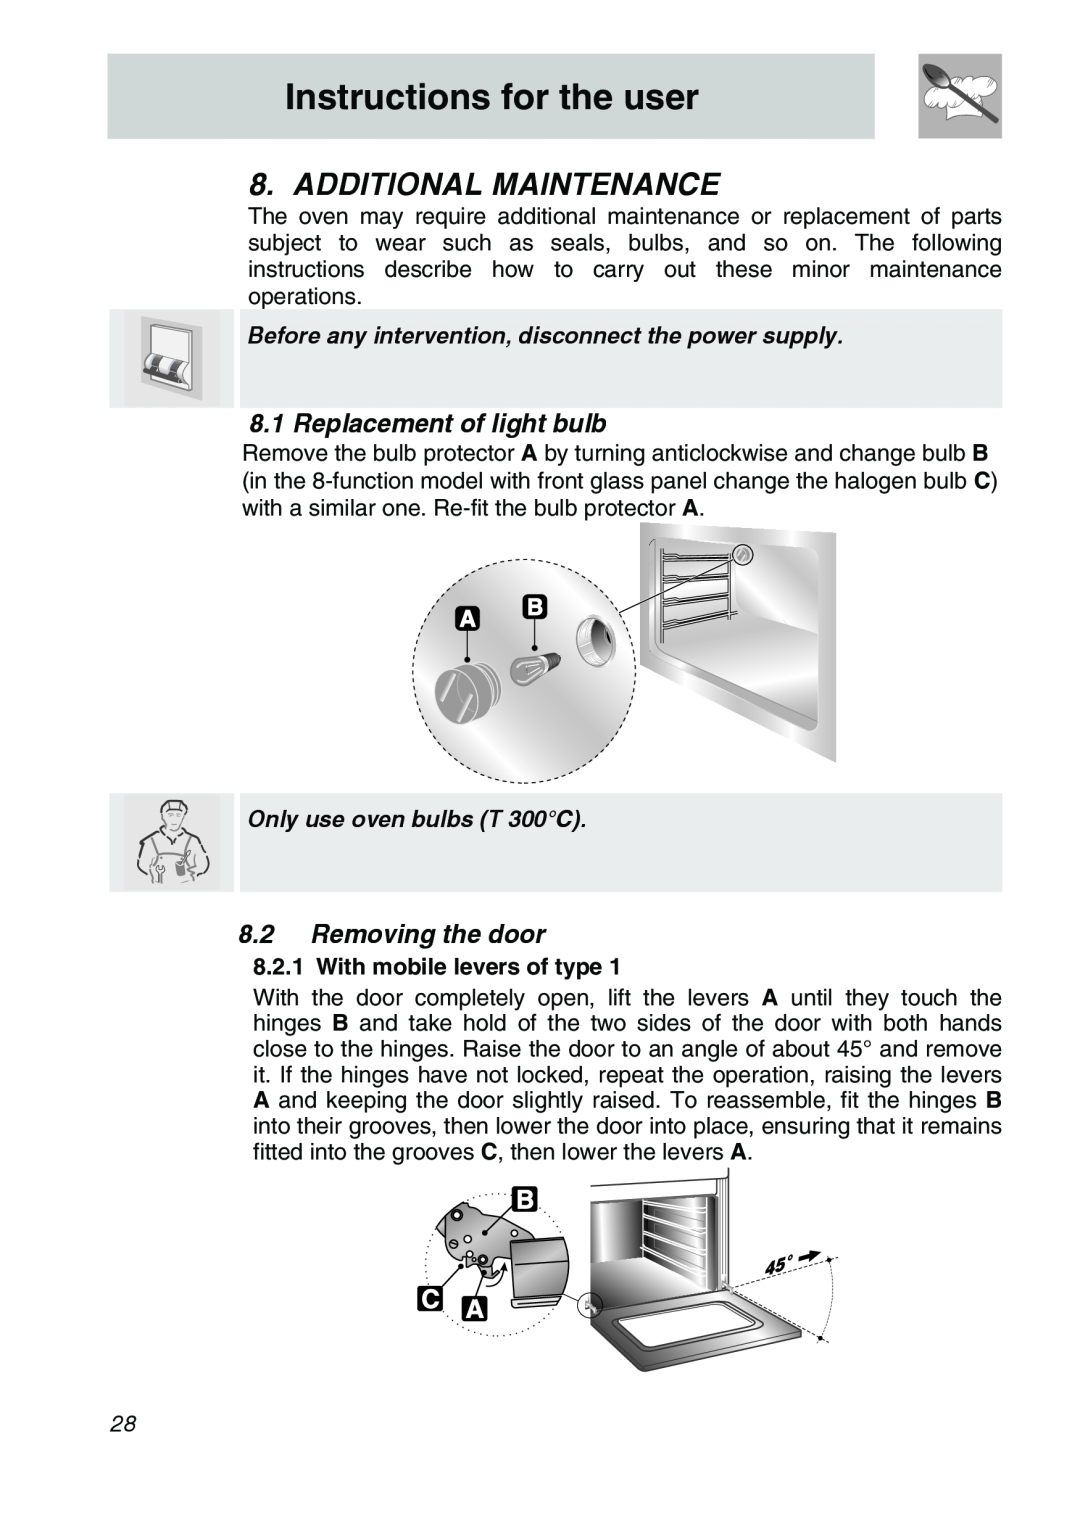 Smeg SA301W-5 manual Additional Maintenance, Replacement of light bulb, 8.2Removing the door, Instructions for the user 